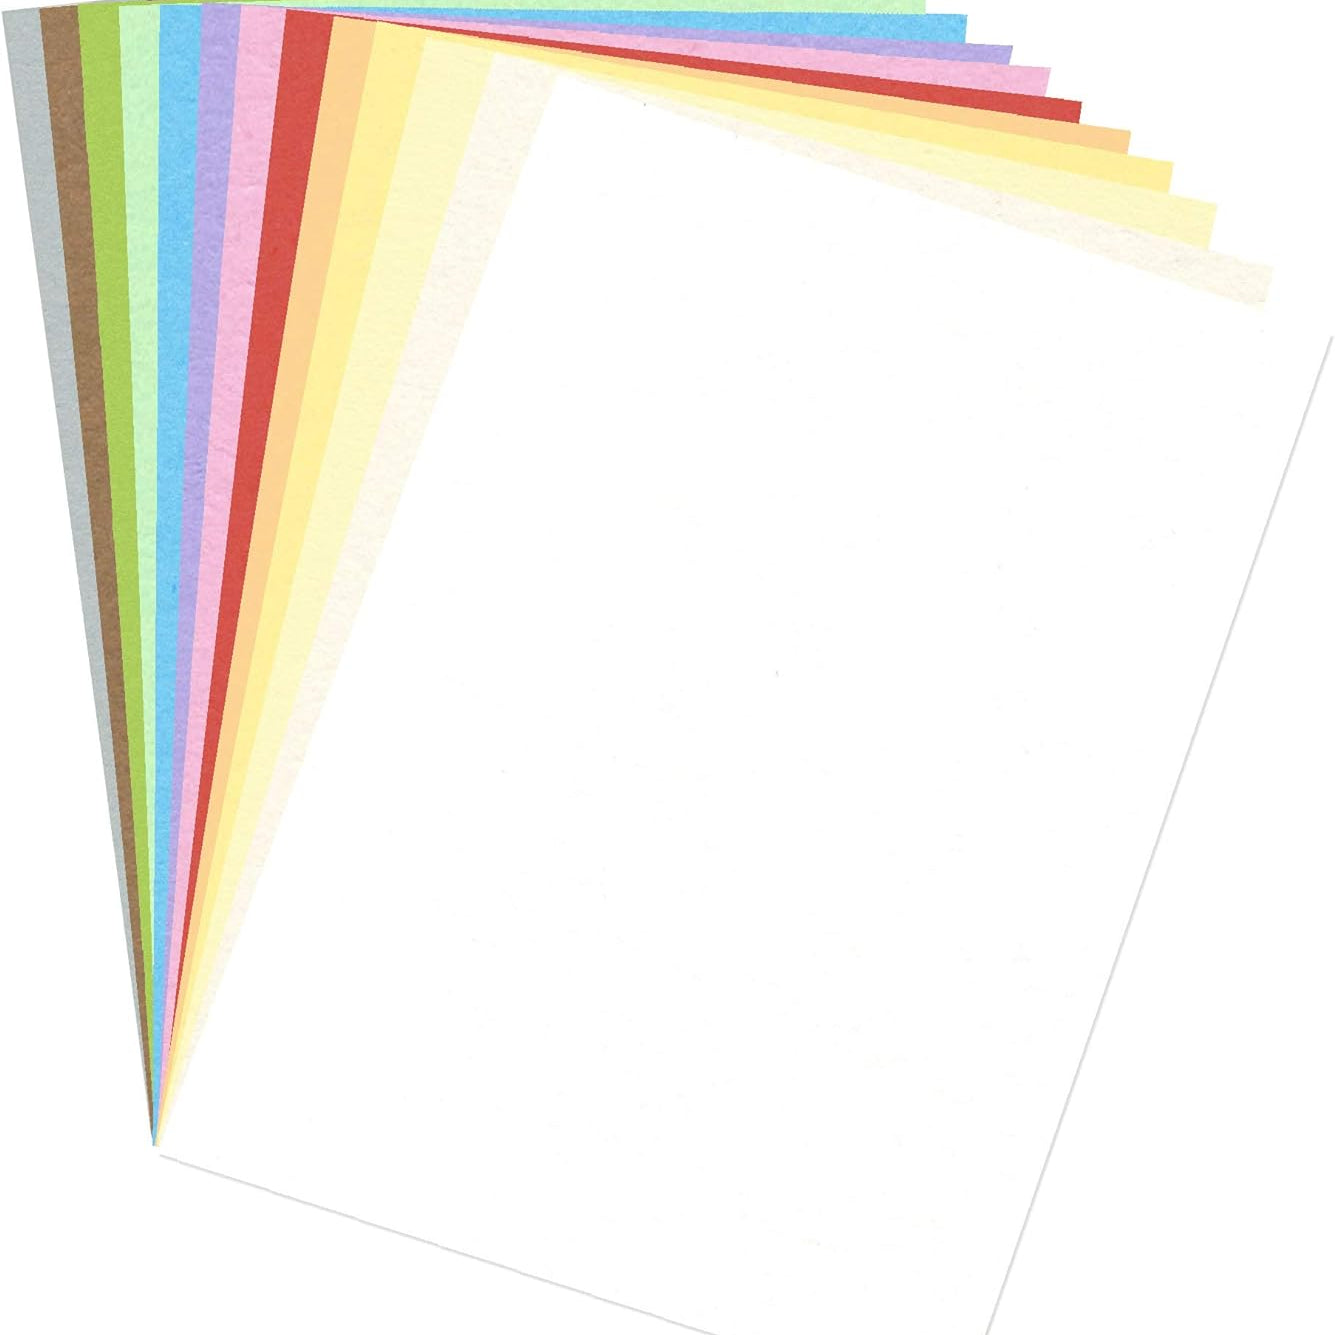 CLAIREFONTAINE Maya Pad A3 120gsm 25s Assorted Pastel